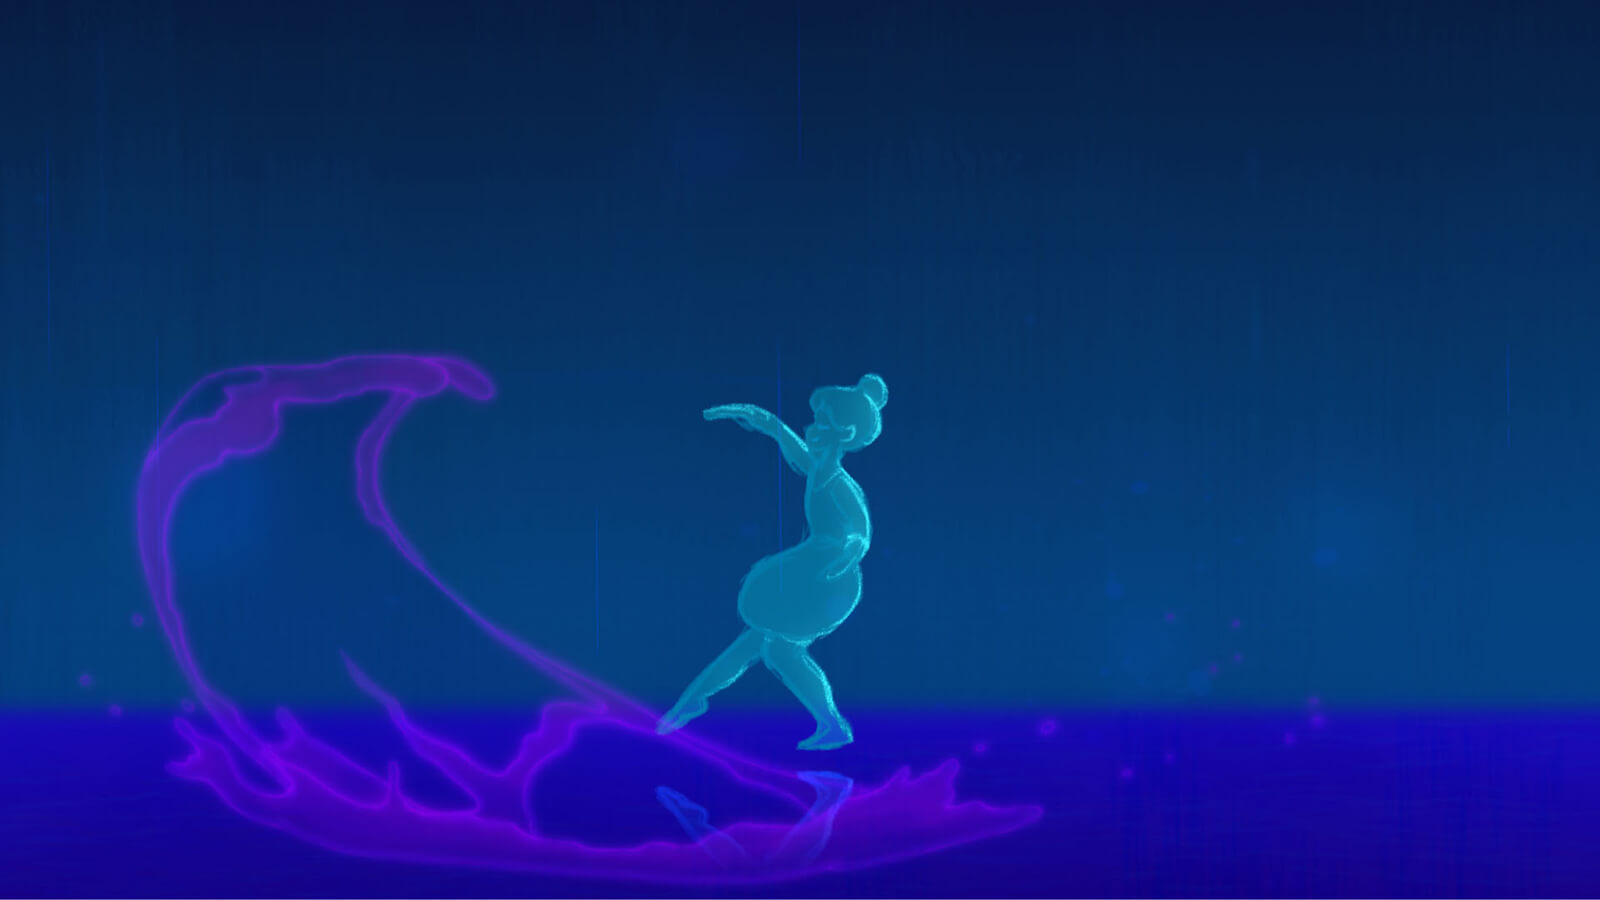 A turquoise ballerina dances as a purple wave crests towards her.